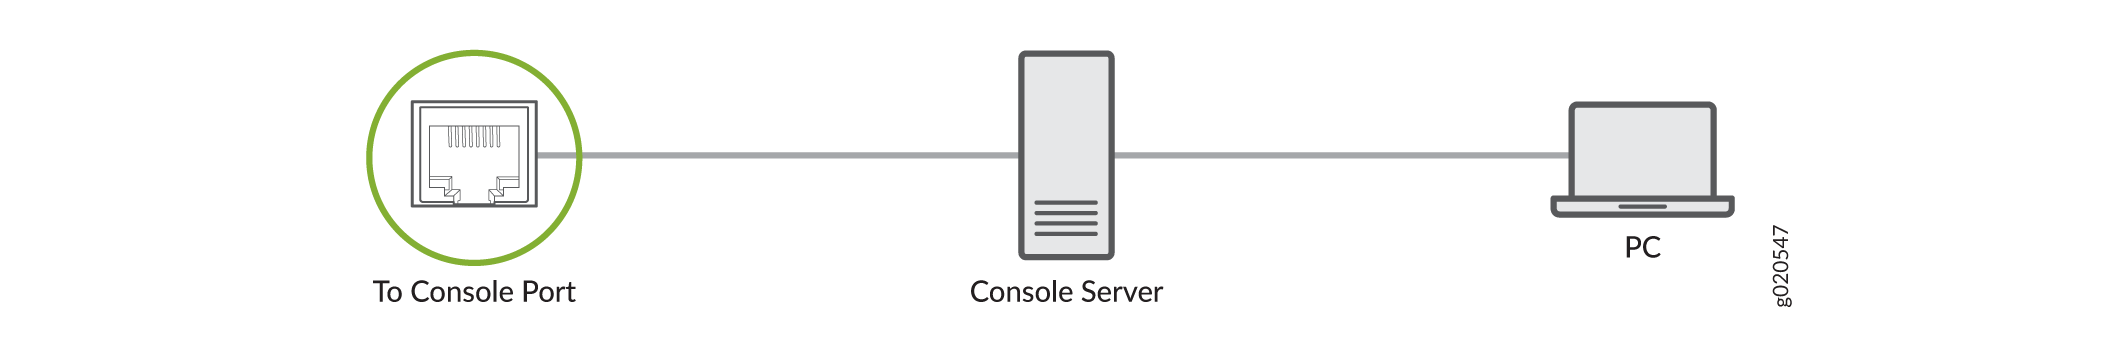 Connect the ACX7024 Router to a Management Console through a Console Server